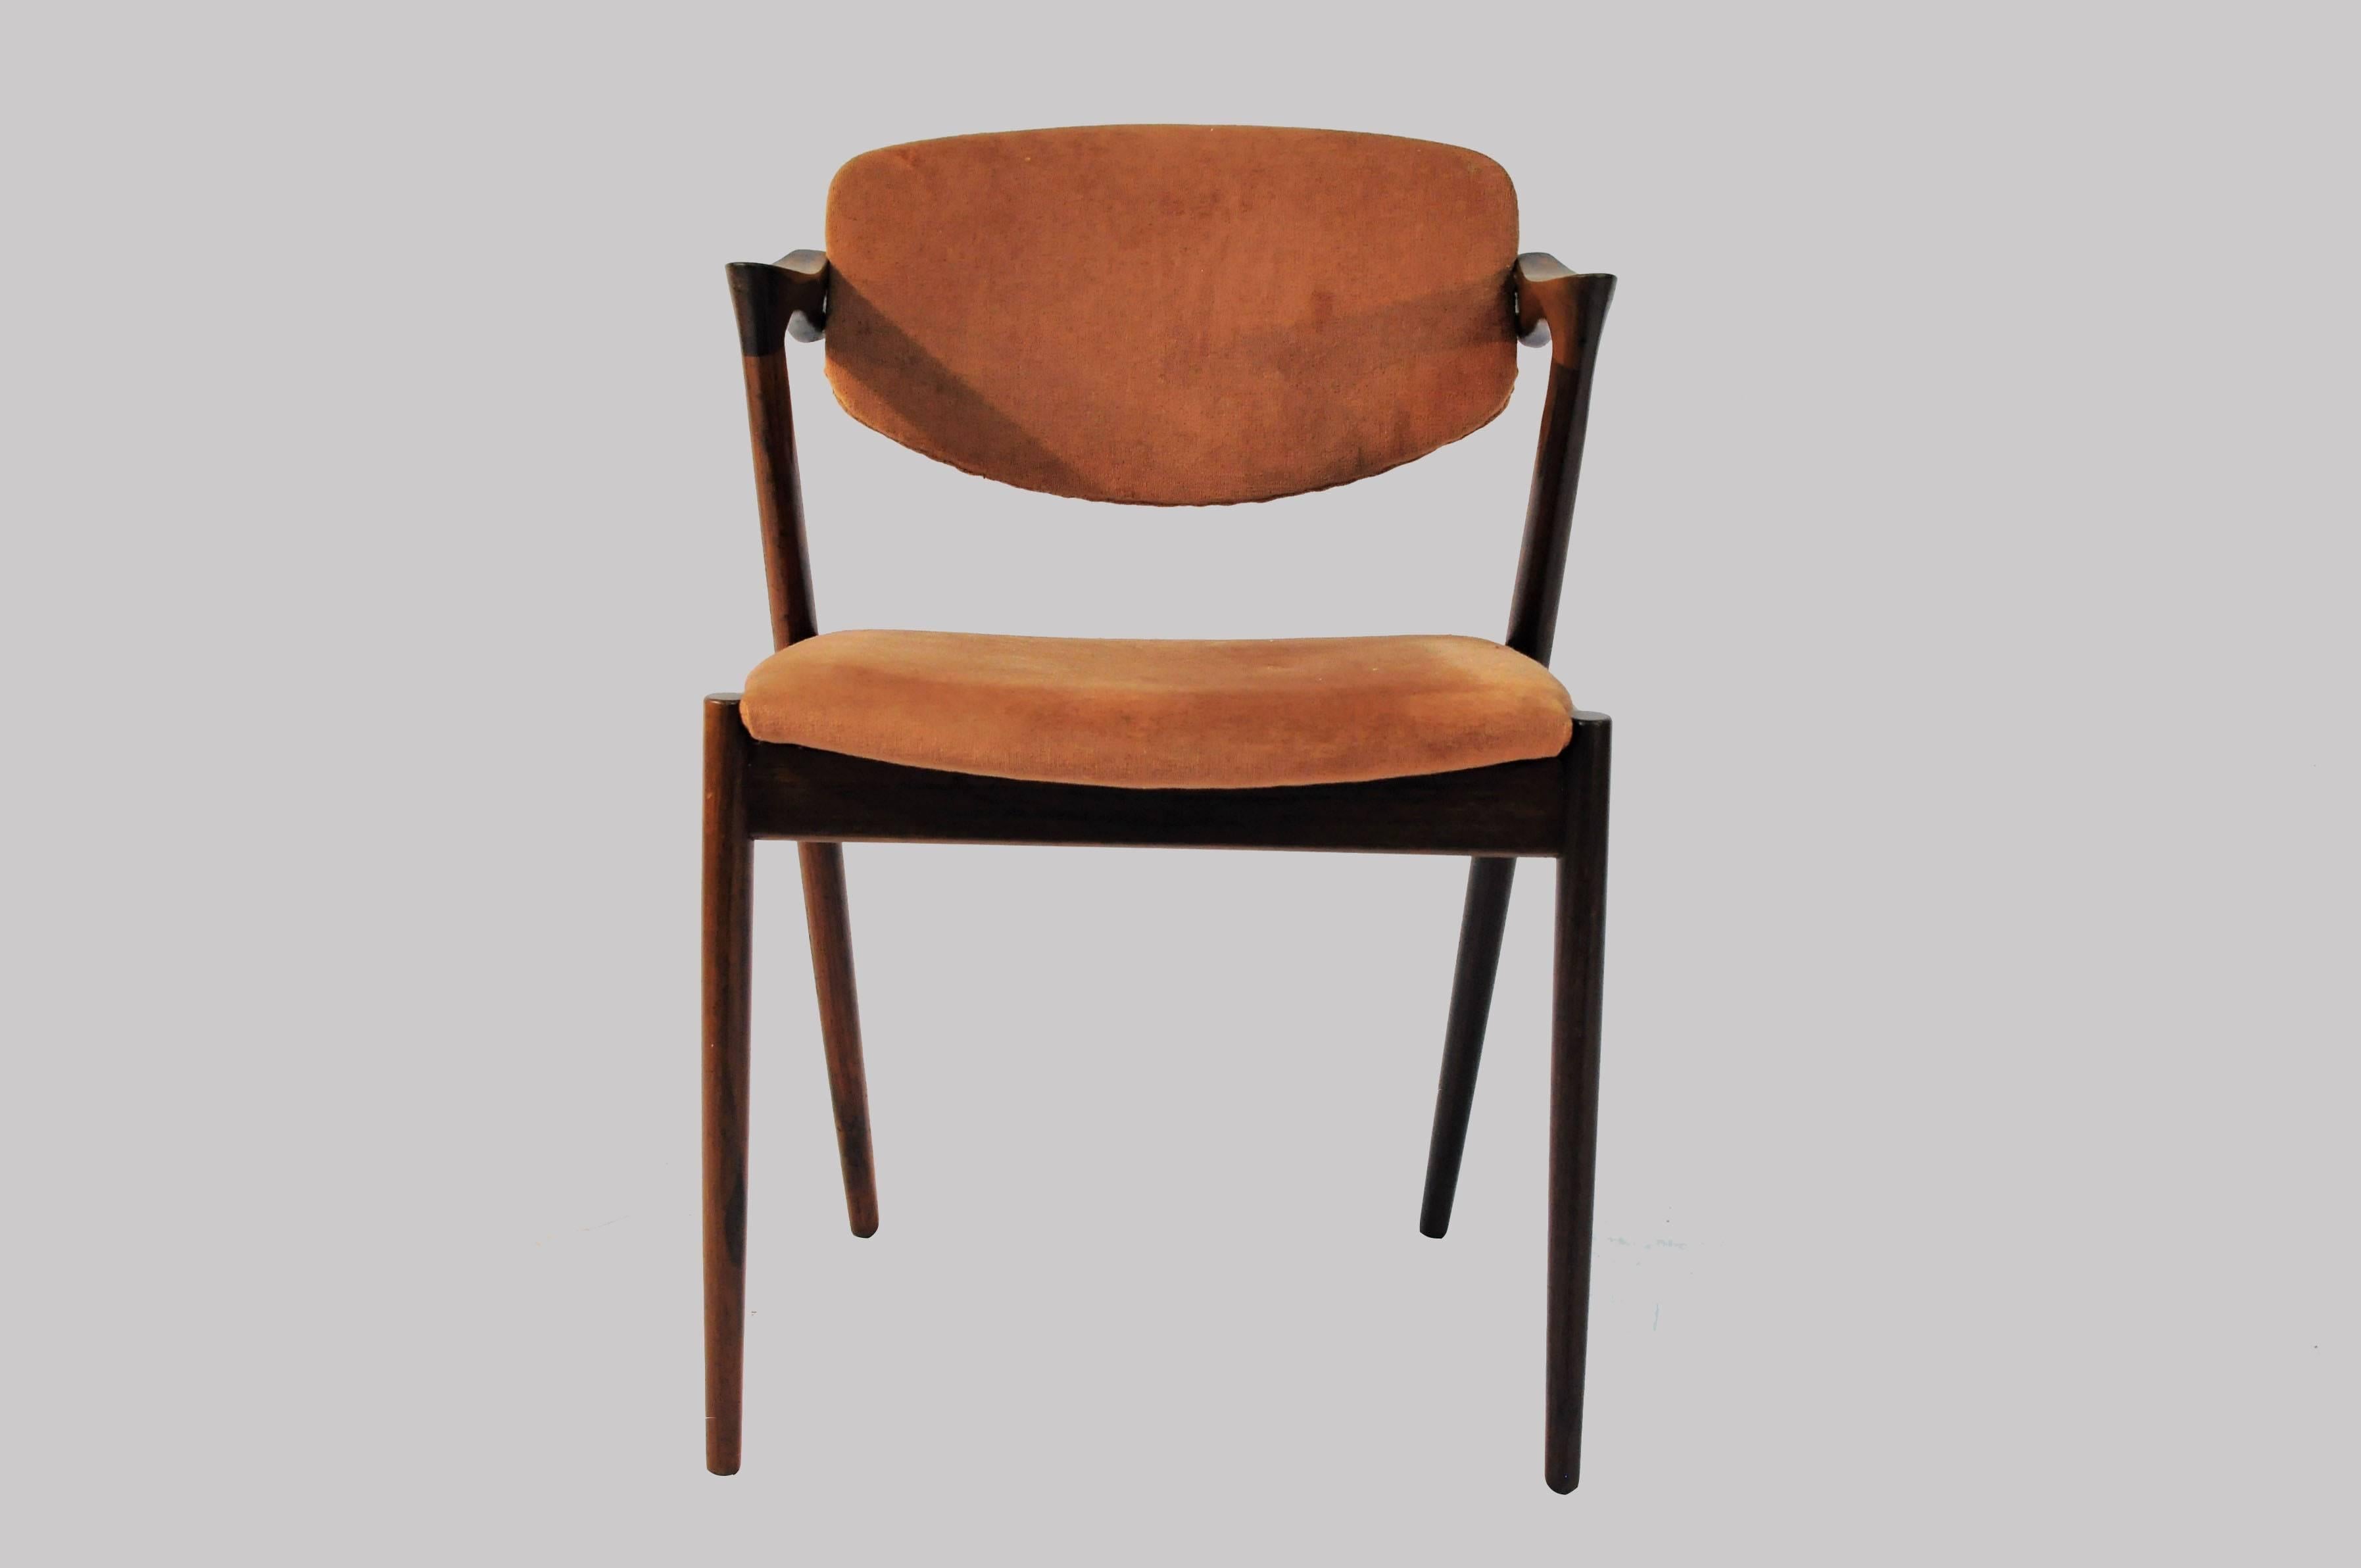 Model 42 rosewood dining chairs with adjustable backrest with different types of upholstery by Kai Kristiansen for Schous Møbelfabrik.

The chairs have Kai Kristiansens typical light and elegant design that make them fit in easily where you want